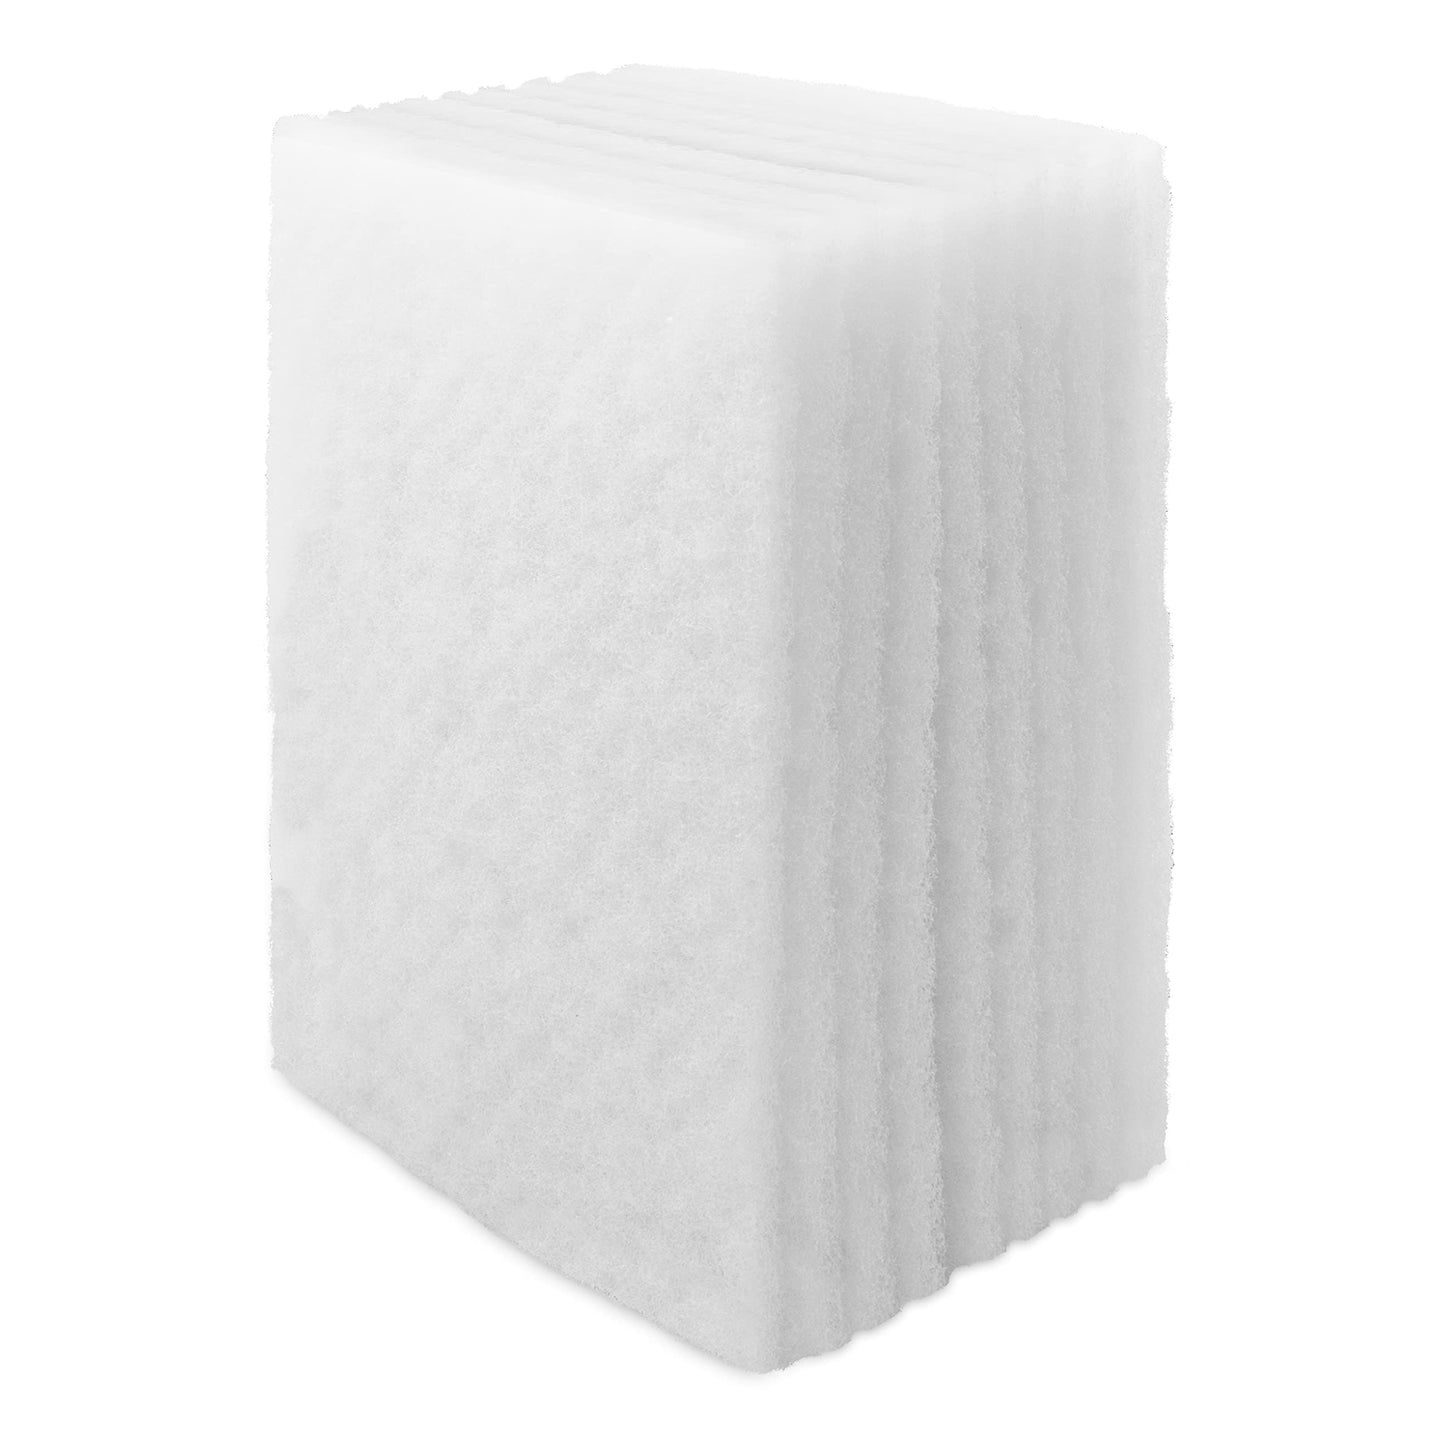 10 Pack of White Non Scratch Non-Woven Pads for Cleaning/Polishing and Multi Purpose Use in Your Home • Workshop or DIY Garage Shop Made in The USA